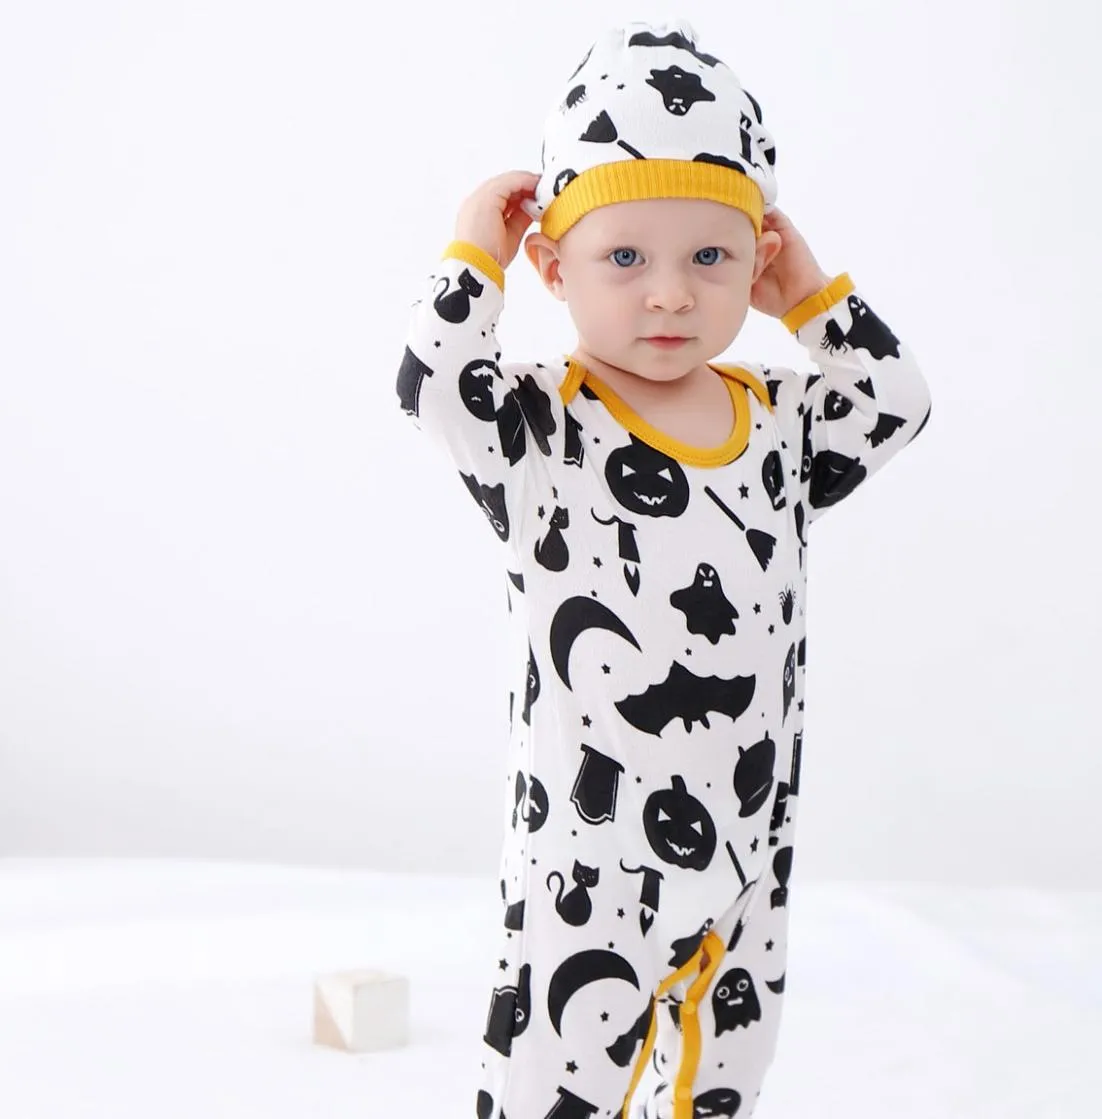 Babys Designer Crawling Suits Boys Childrens Wear Halloween Pumpkin Letter Printing Dress Hat Coverall Letter Print Clothes for 3690316